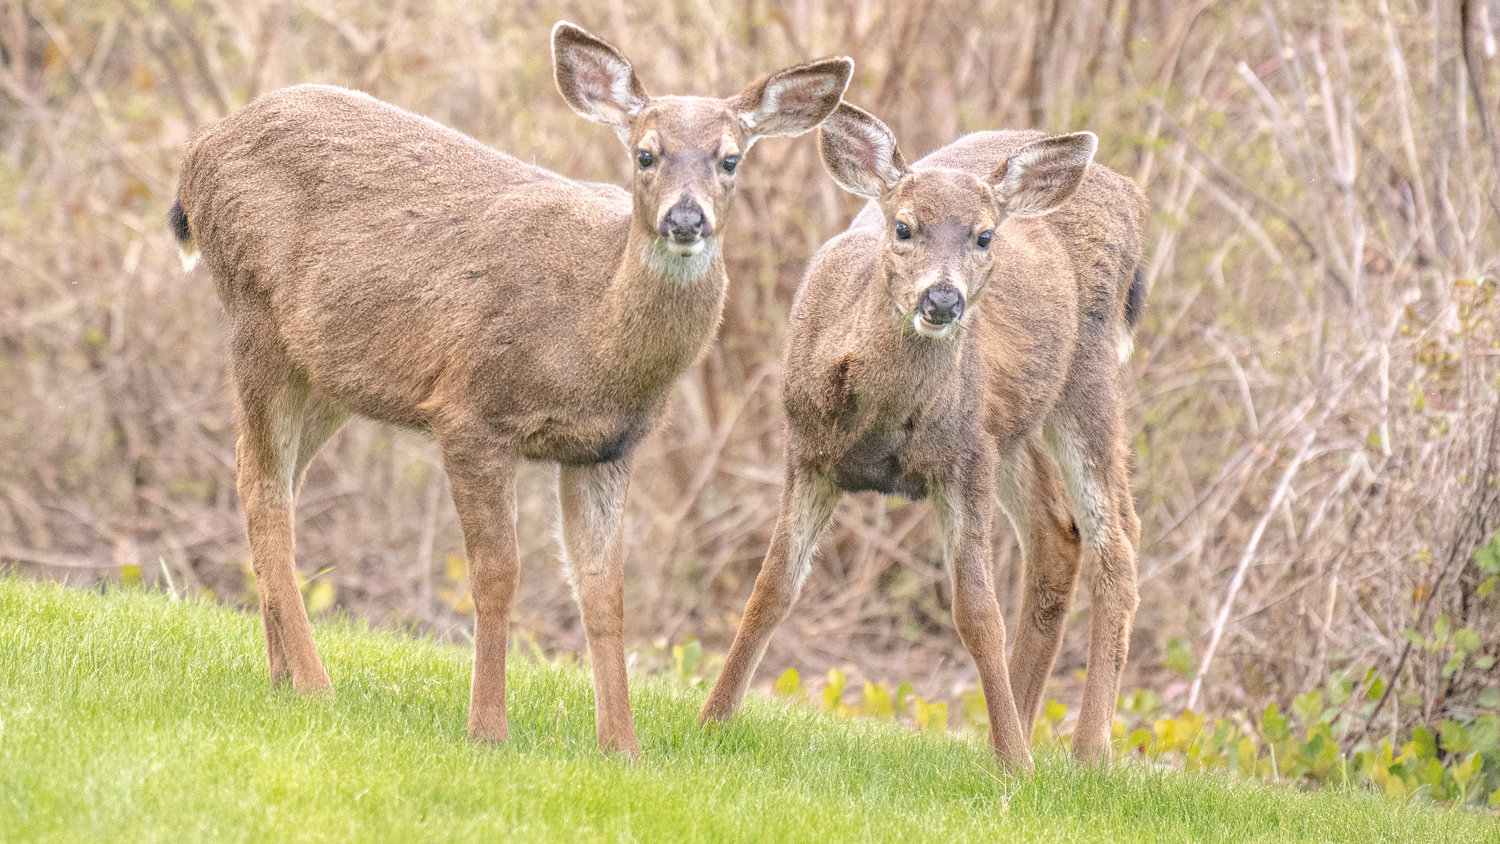 Two young deer look across a lawn in Chehalis on Wednesday afternoon.